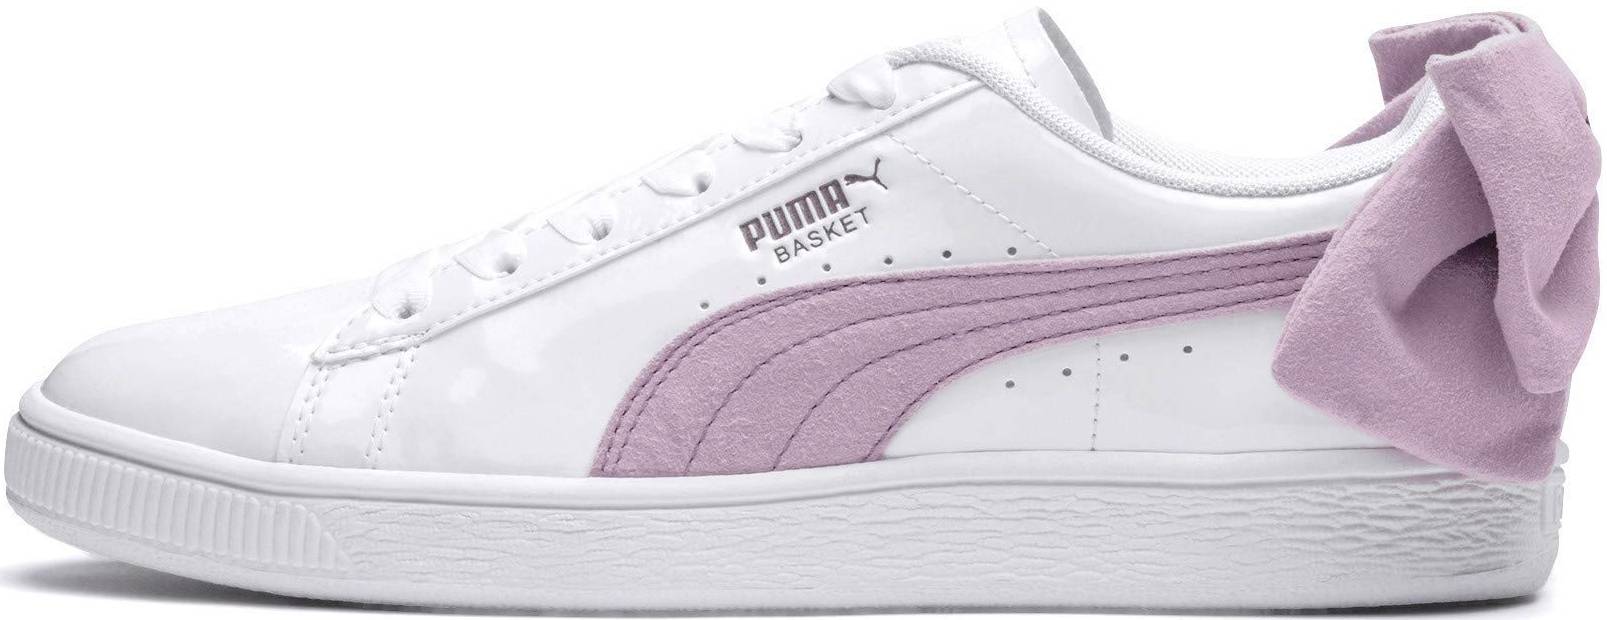 Only $25 + Review of Puma Suede Bow 